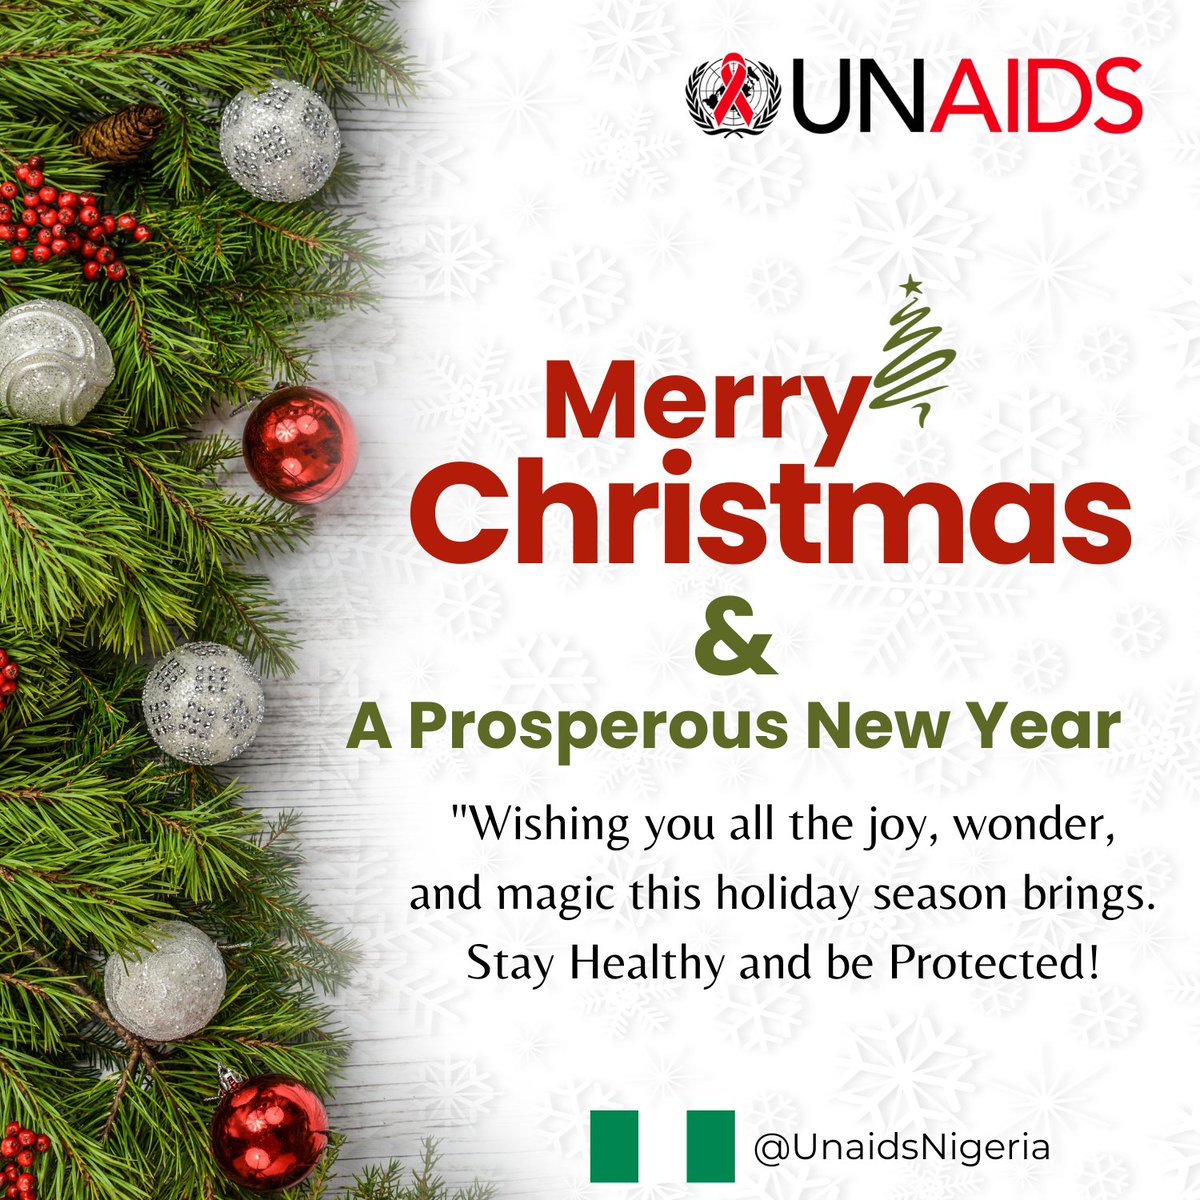 'Warmest wishes for a festive Christmas! 🎄 May this season inspire hope and solidarity in the fight against HIV/AIDS. Let's come together to spread love, break stigma, reduce risk and work towards a healthier, more inclusive world. #MerryChristmas #EndAIDS 🌍❤️' @lz